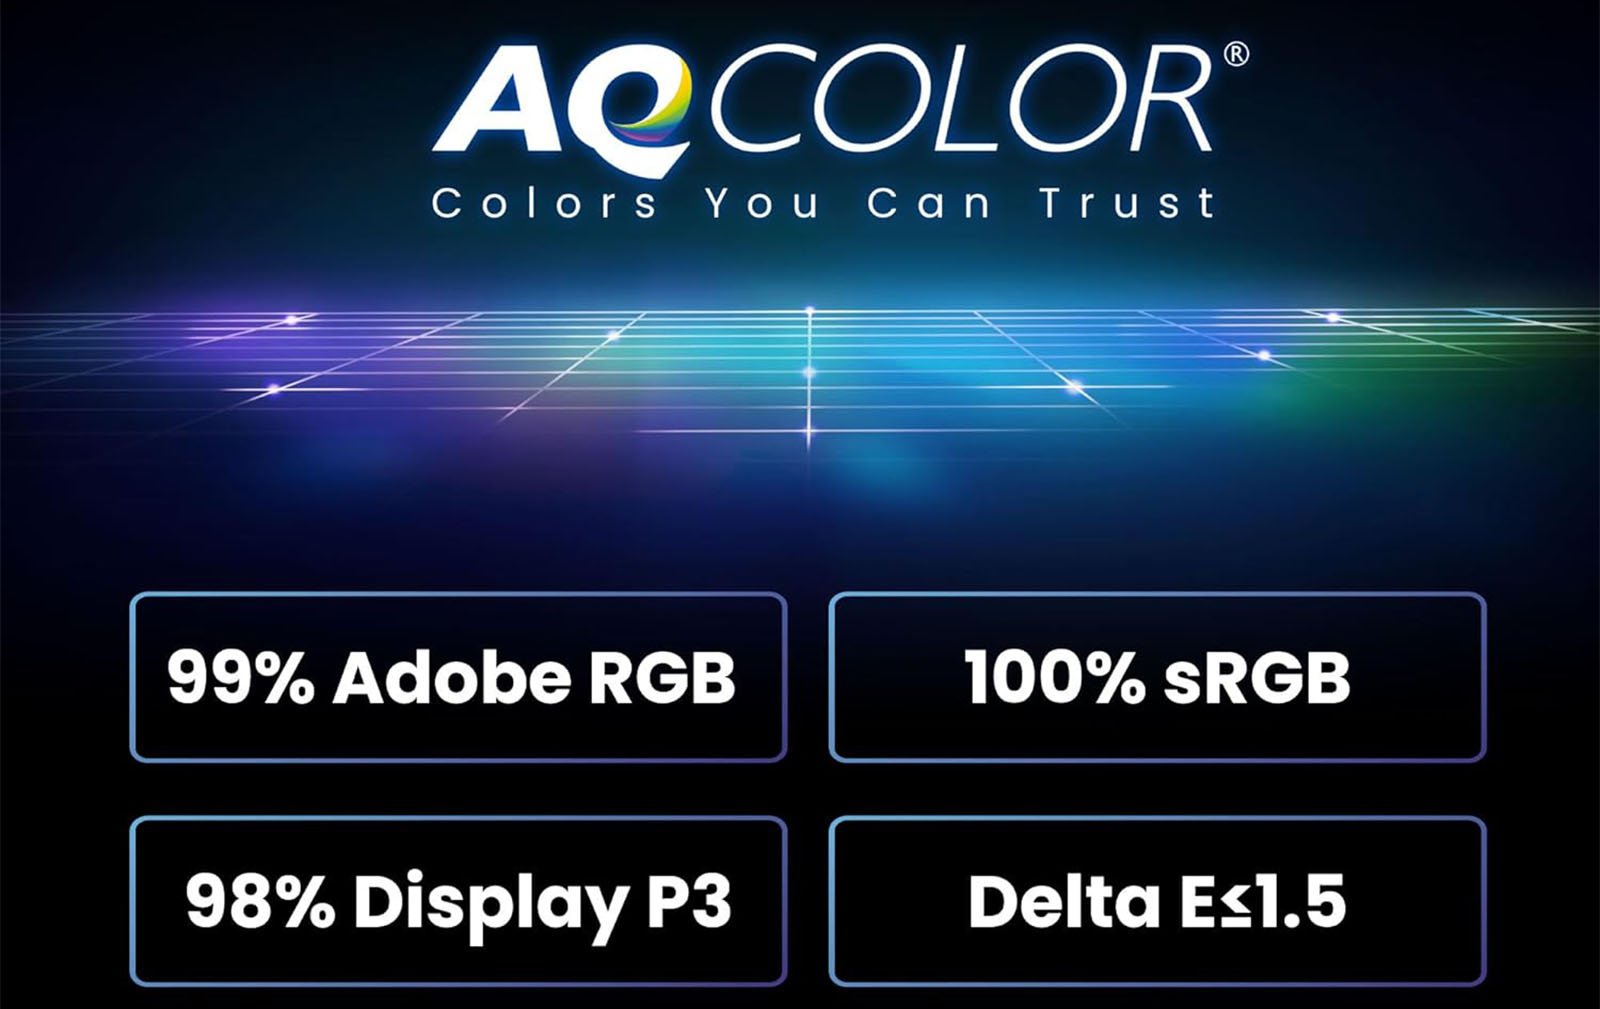 Digital graphic for "aecolor" featuring text "colors you can trust" above color fidelity specs like "99% adobe rgb", "100% srgb", "98% display p3", and "delta ex1.5" against a dark background with neon lines.